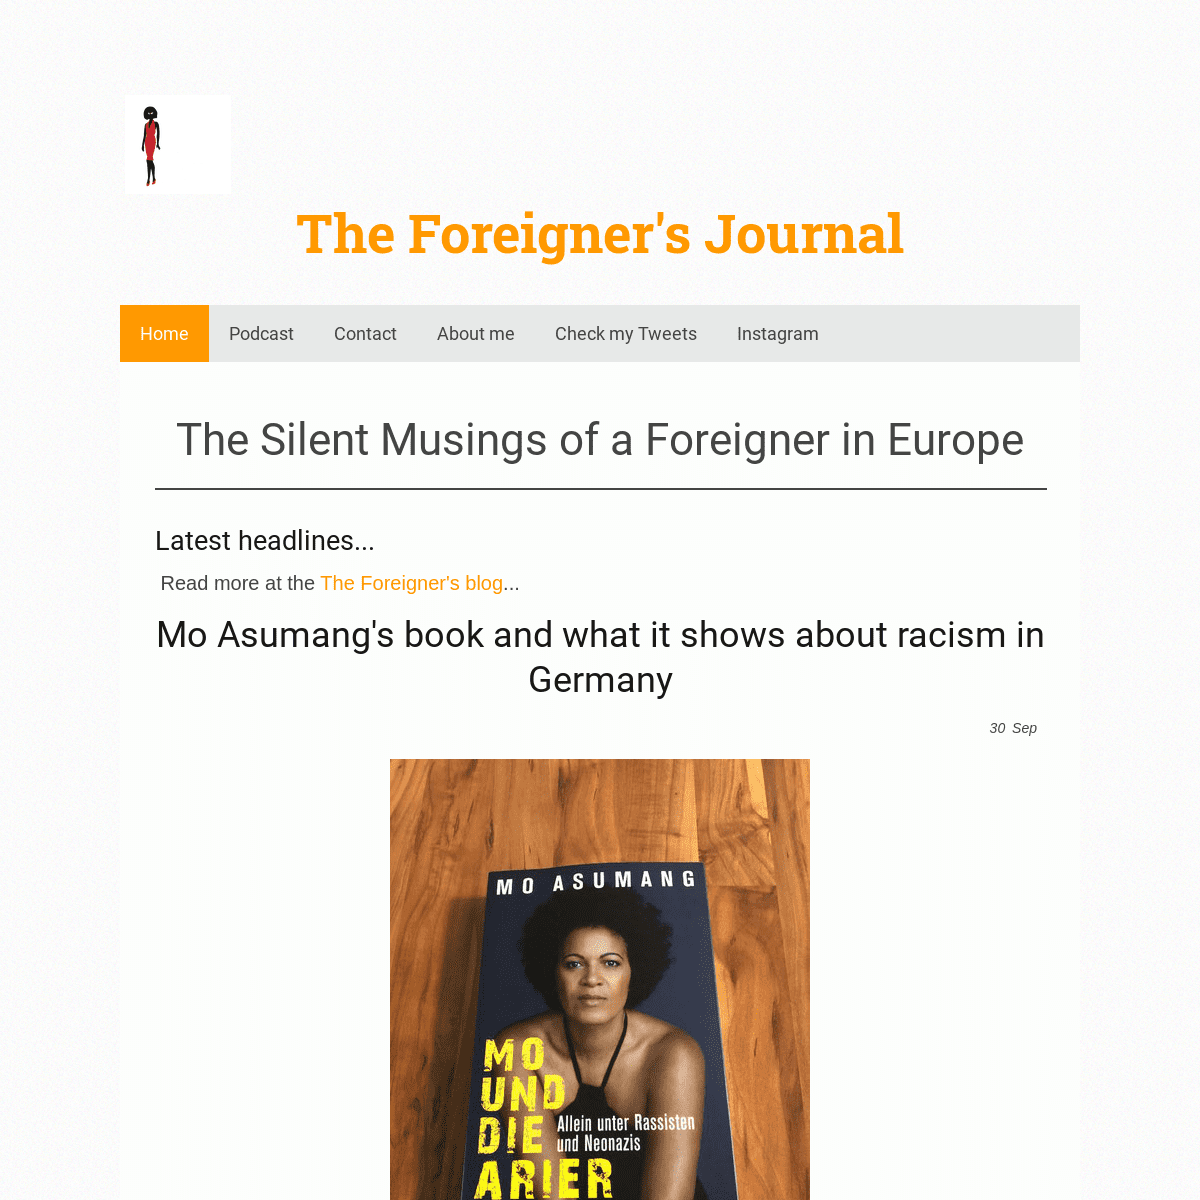 A complete backup of theforeignersjournal.com